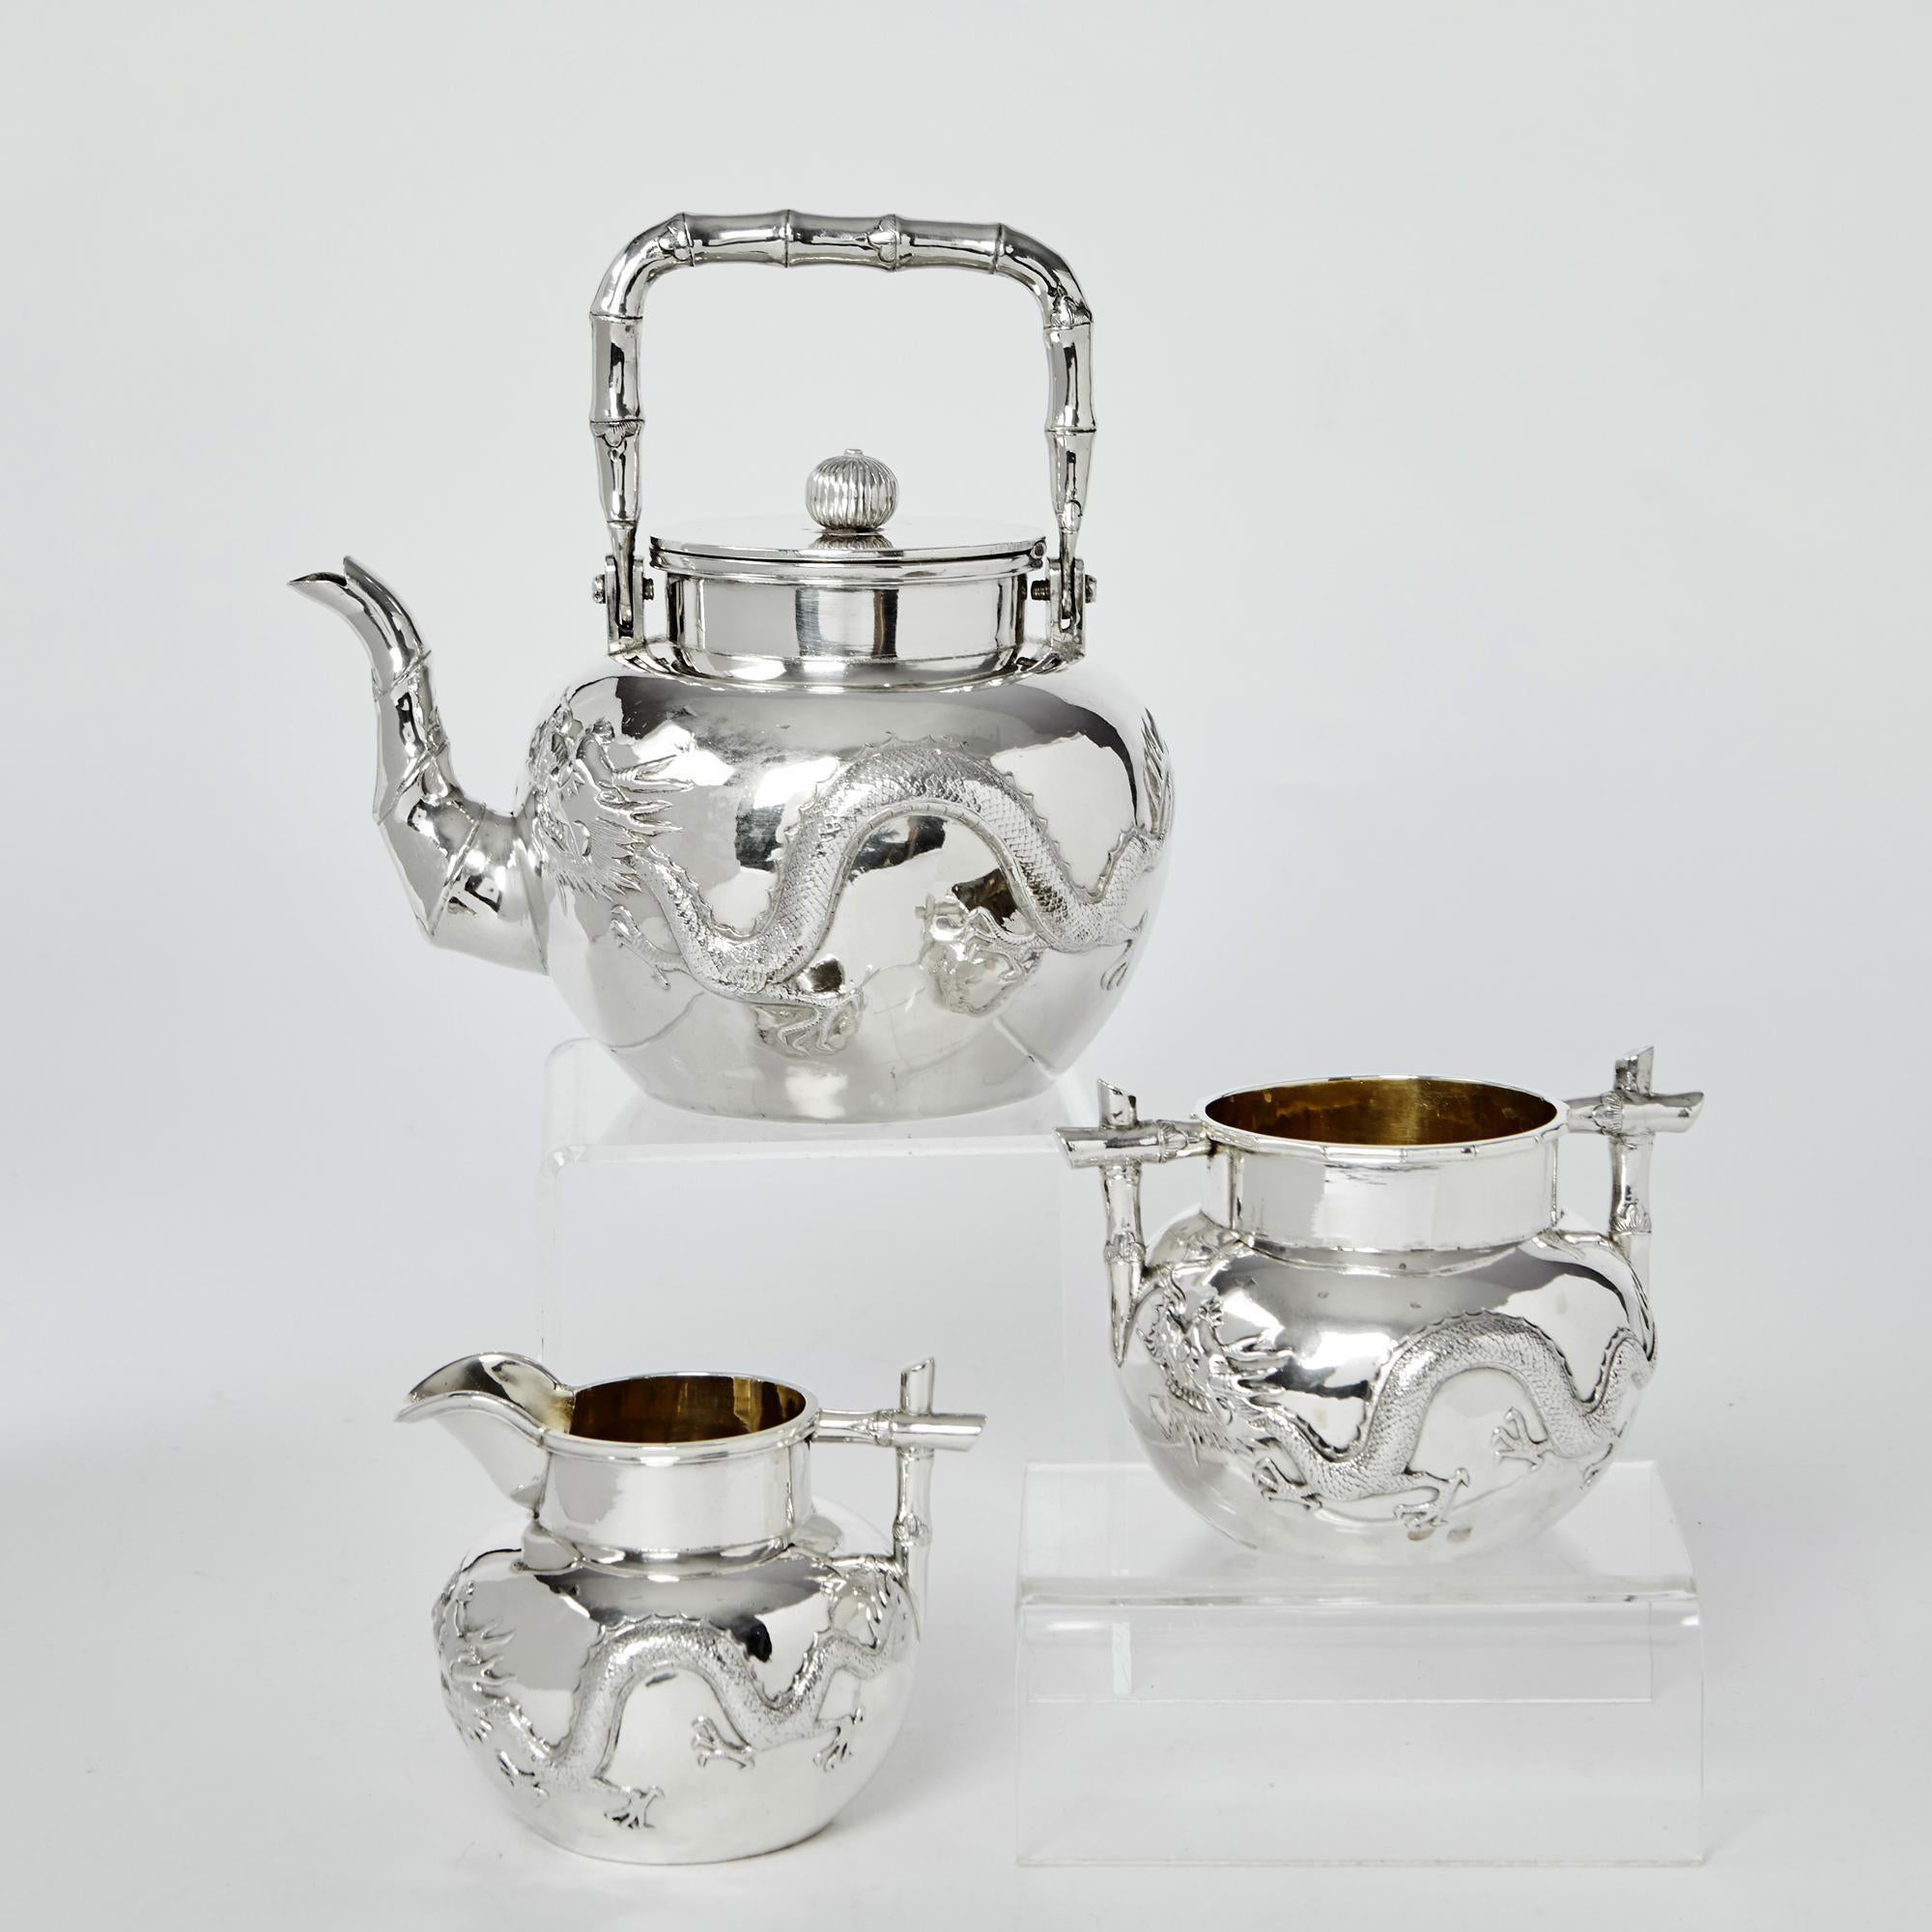 Classic Chinese export silver tea set comprising teapot, milk jug and sugar bowl made in the Liang Sheng ?? workshop. For thousands of years dragons have symbolised wisdom, harmony and prosperity in China and each piece of this charming antique